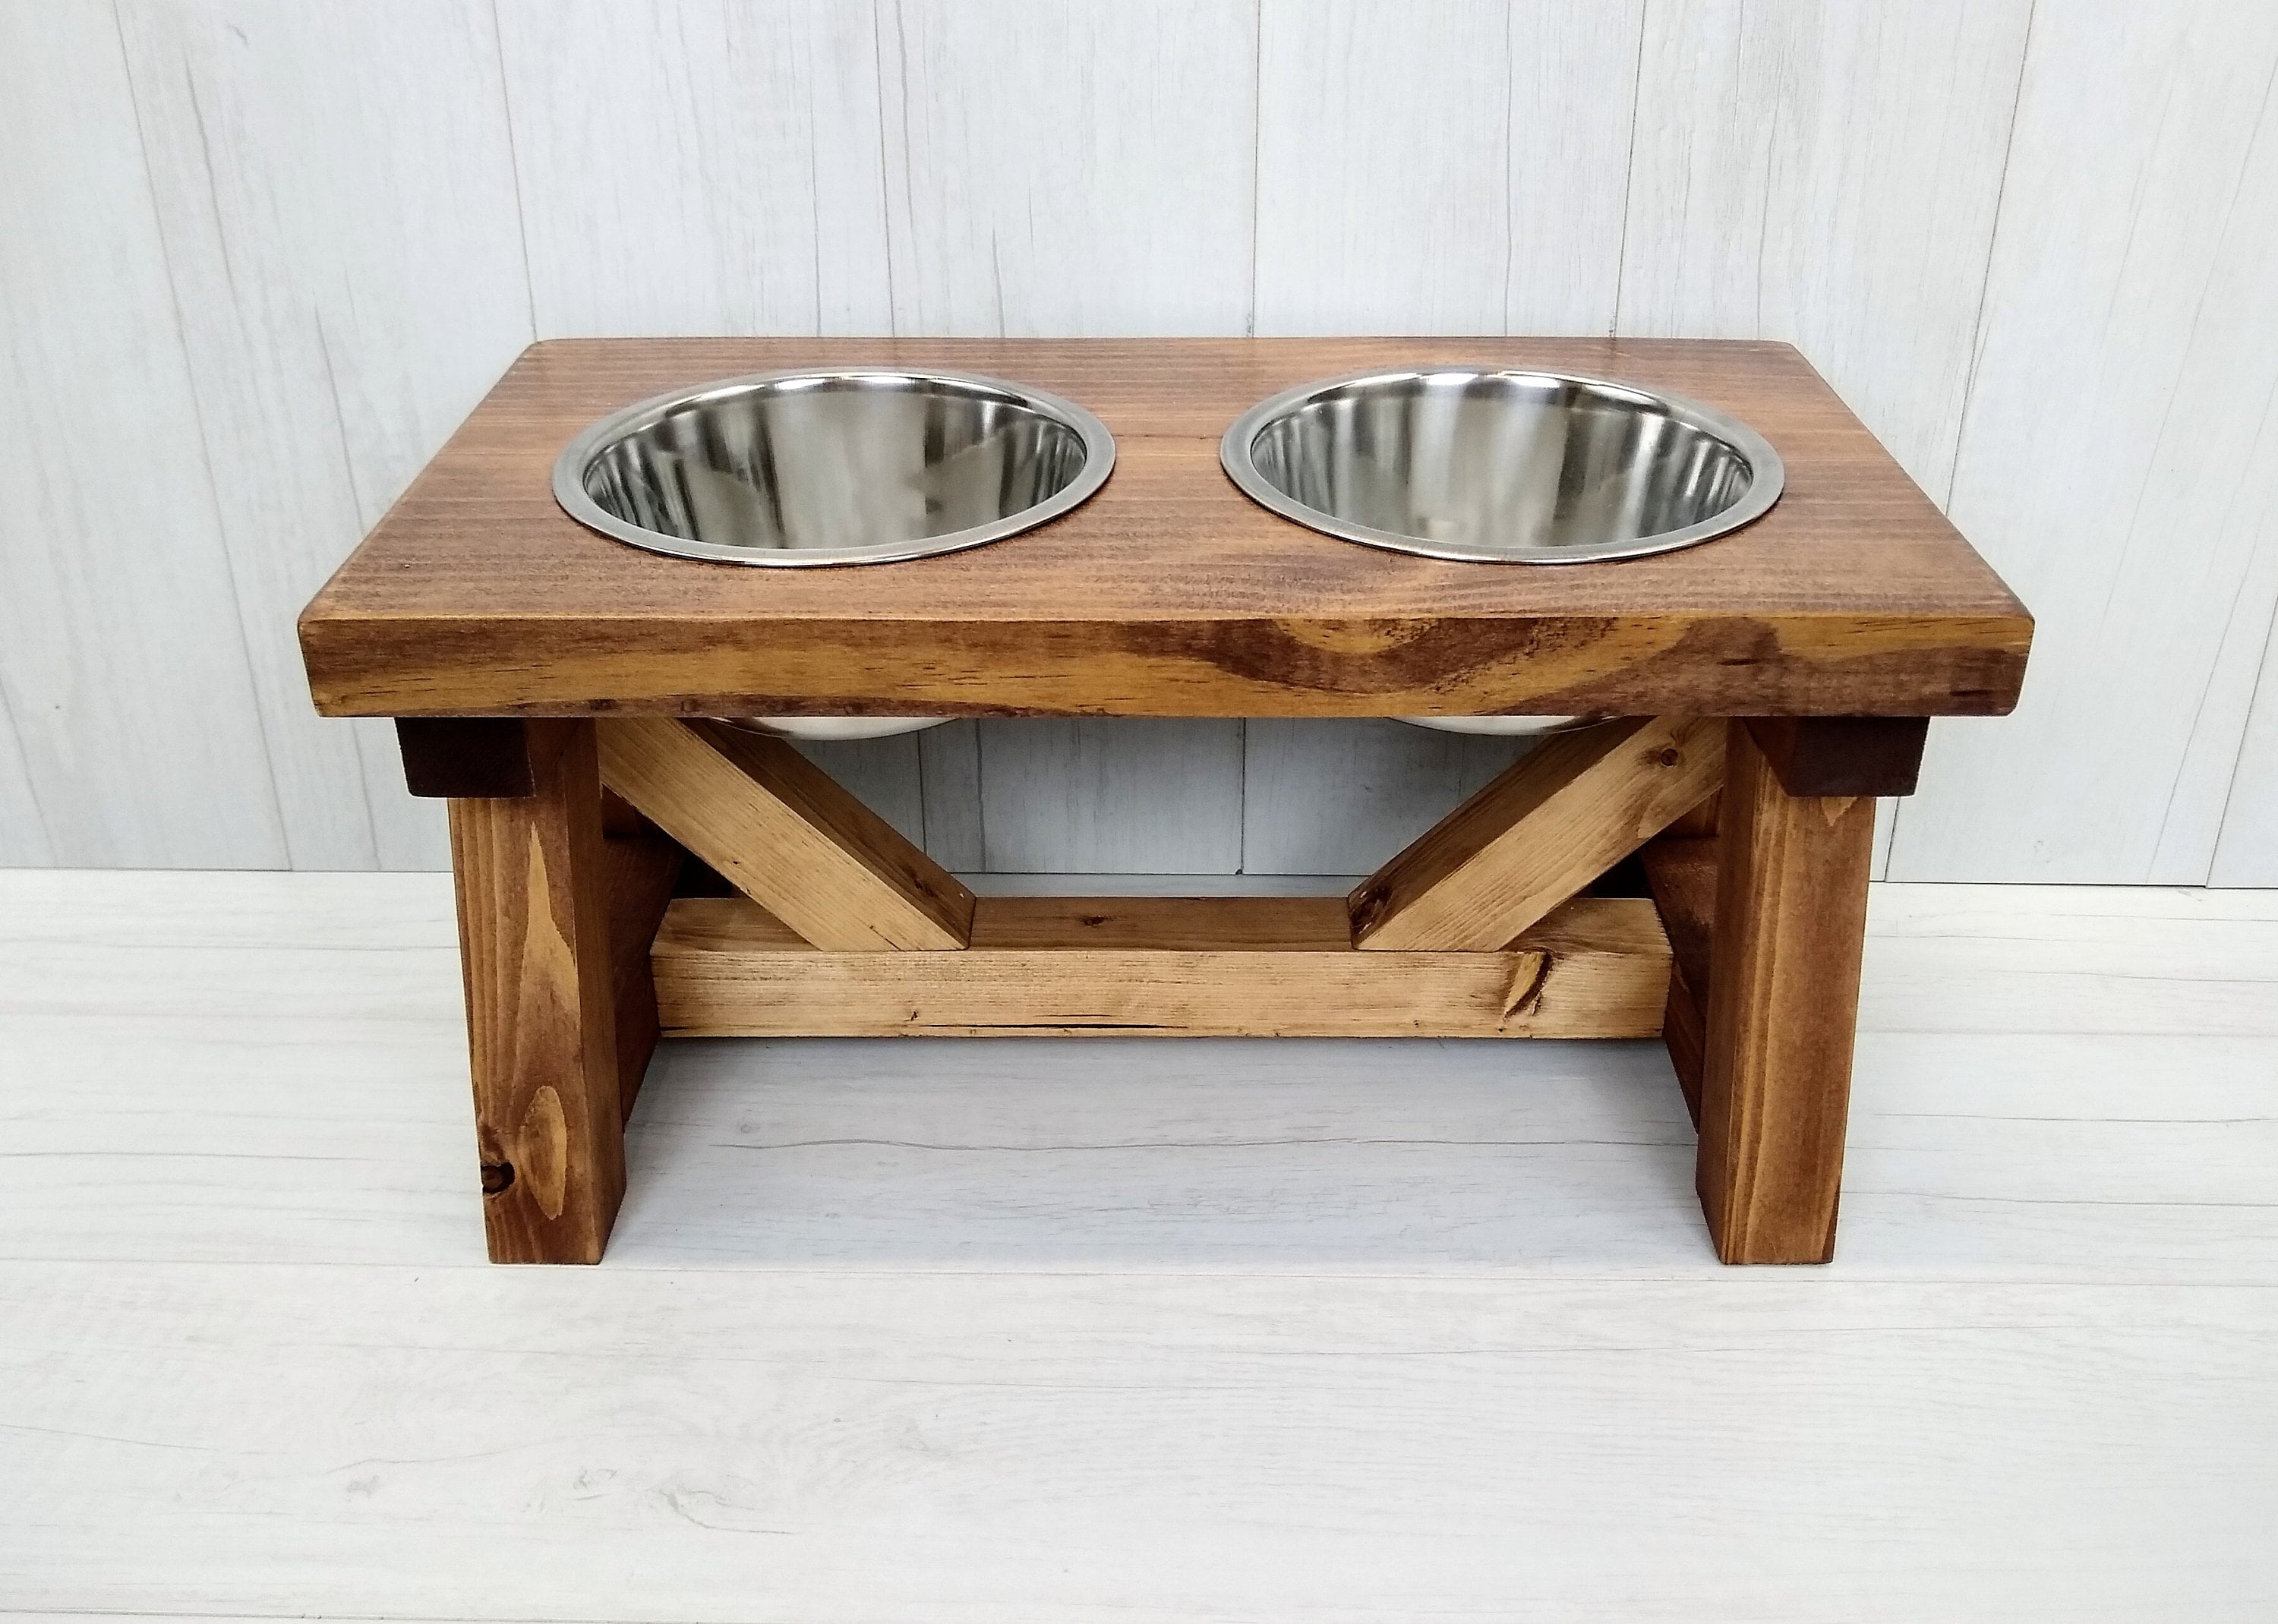 diy modern pet bowl stand – almost makes perfect